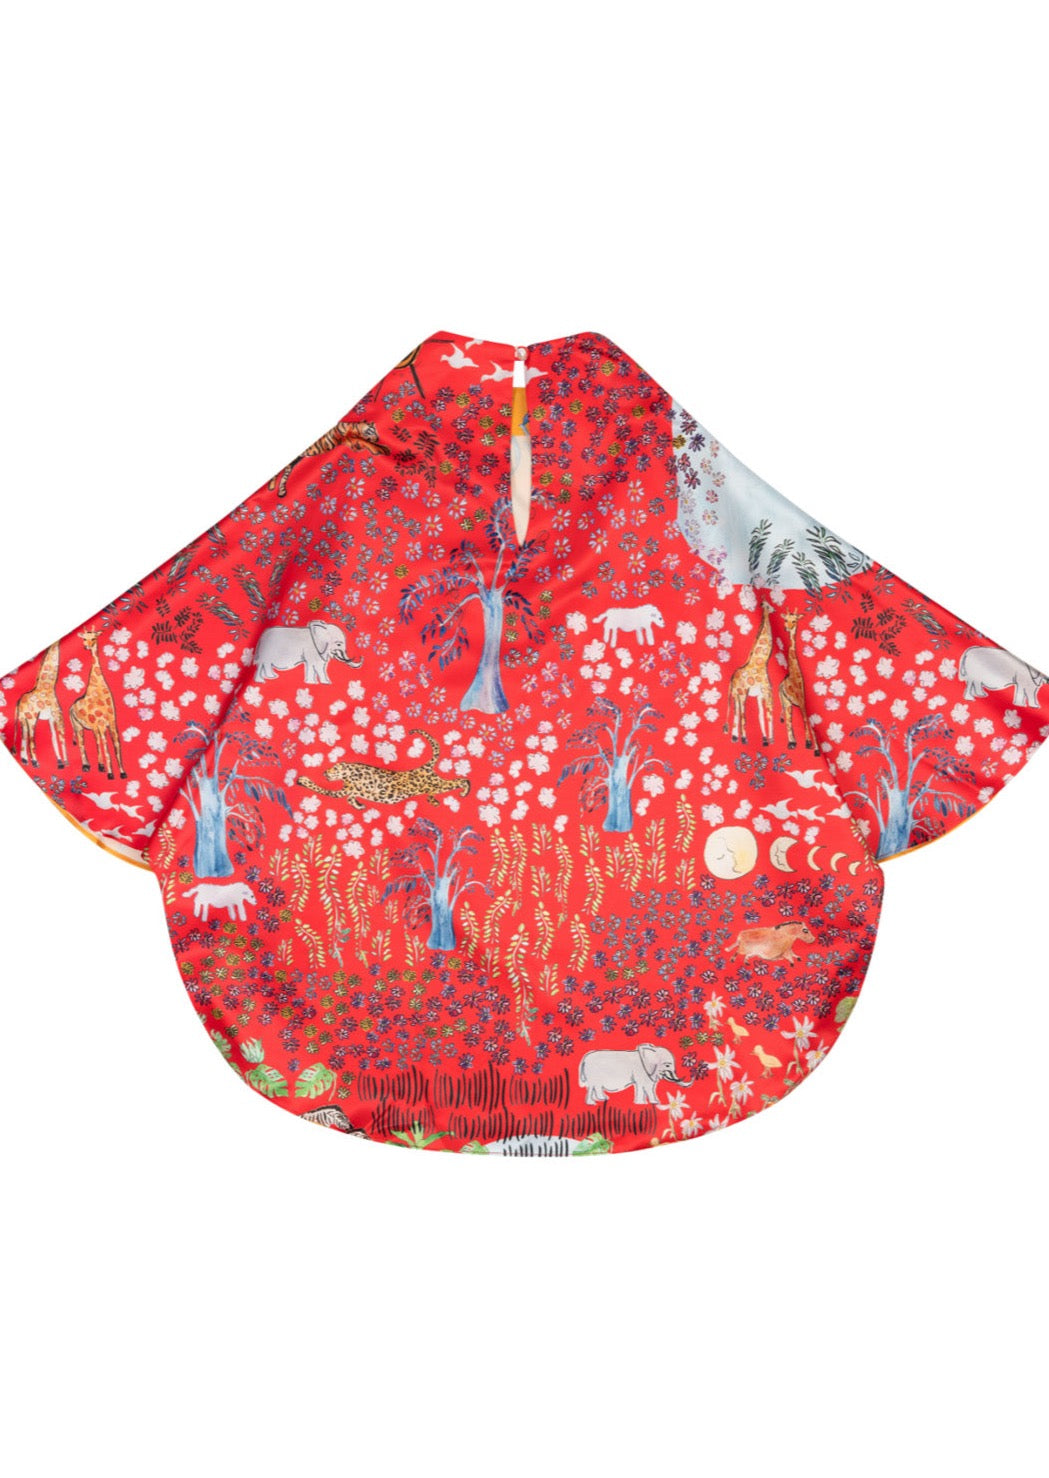 our floatkerchief top is a beautiful ode to timeless tailoring and the perfect canvas for your succulent, joyful prints. This one features a mix of Powder Room and Fever Dream, two Dauphinette classics.